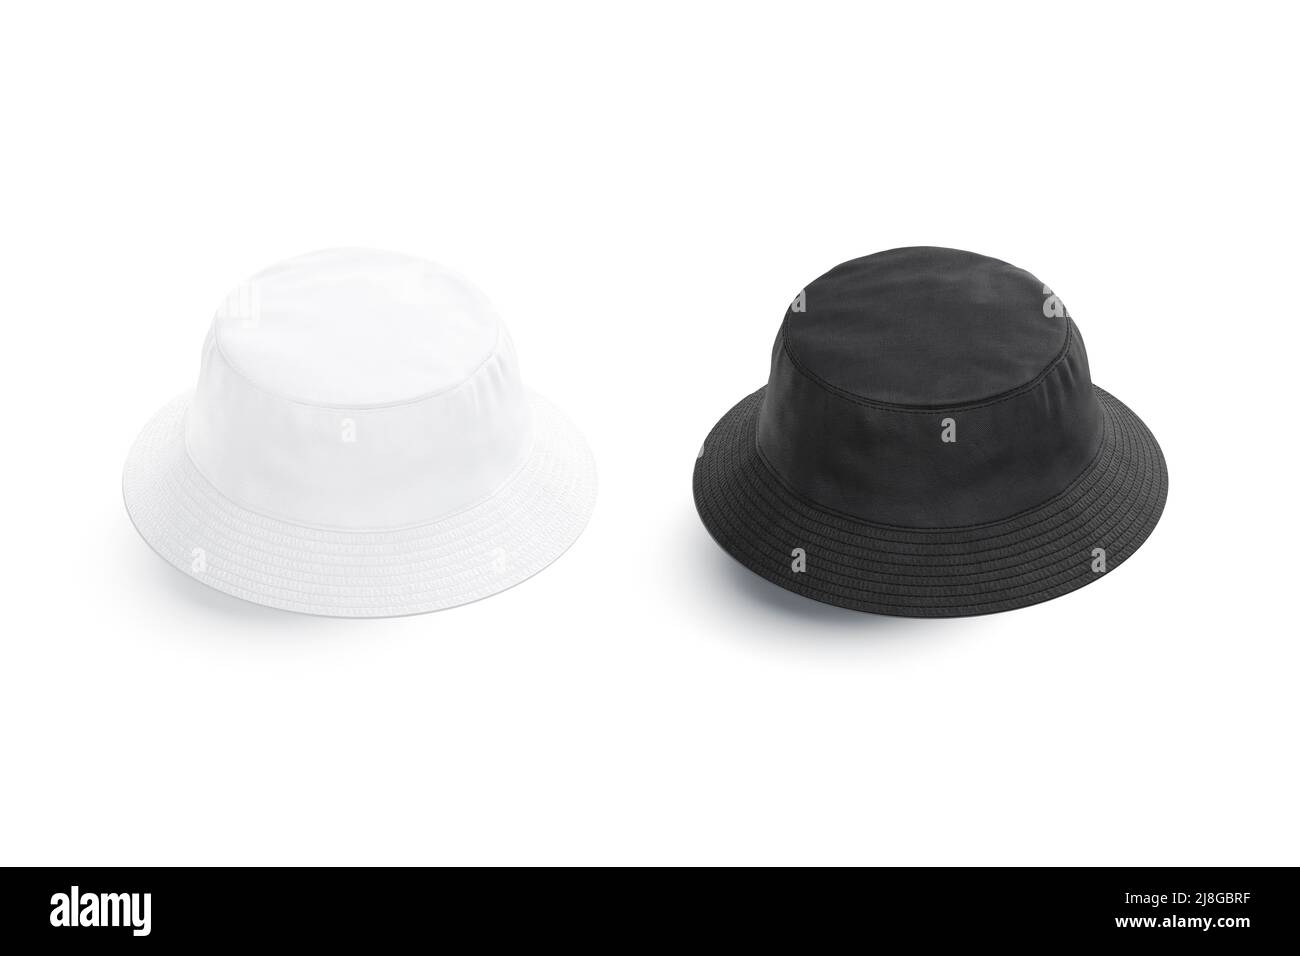 Blank black and white bucket hat mock up, side view Stock Photo